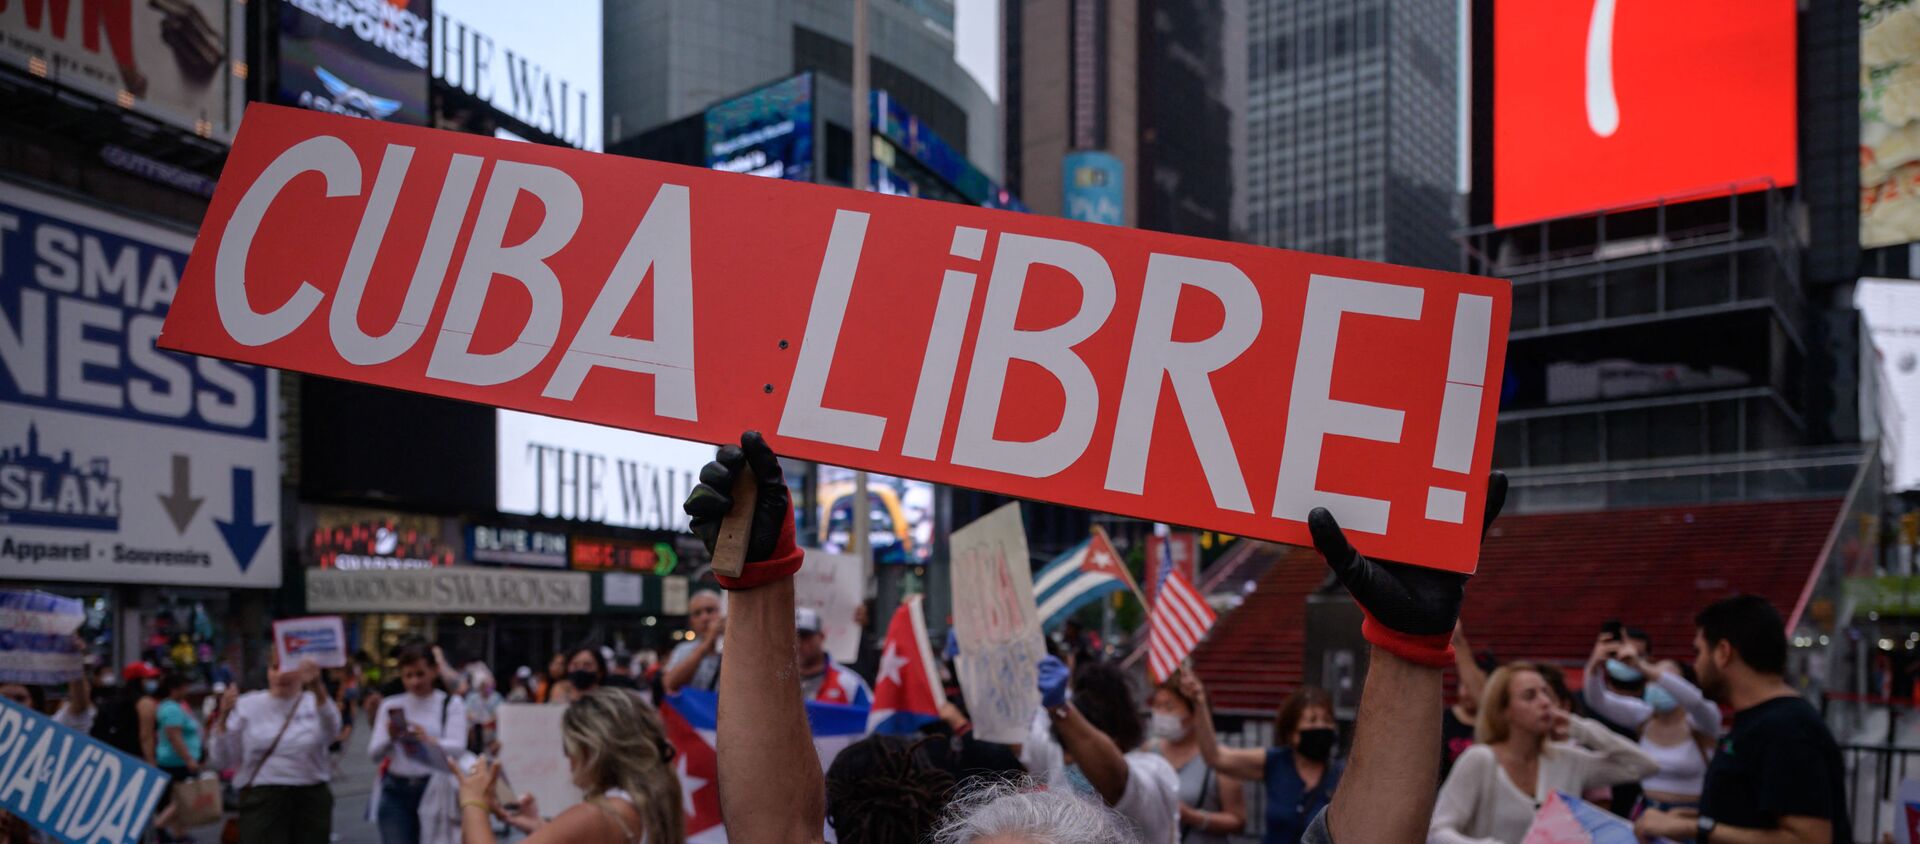 Demonstrators hold placards during a rally held in solidarity with anti-government protests in Cuba, in Times Square, New York on July 13, 2021. - One person died and more than 100 others, including independent journalists and dissidents, have been arrested after unprecedented anti-government protests in Cuba, with some remaining in custody on Tuesday, observers and activists said. - Sputnik International, 1920, 17.07.2021